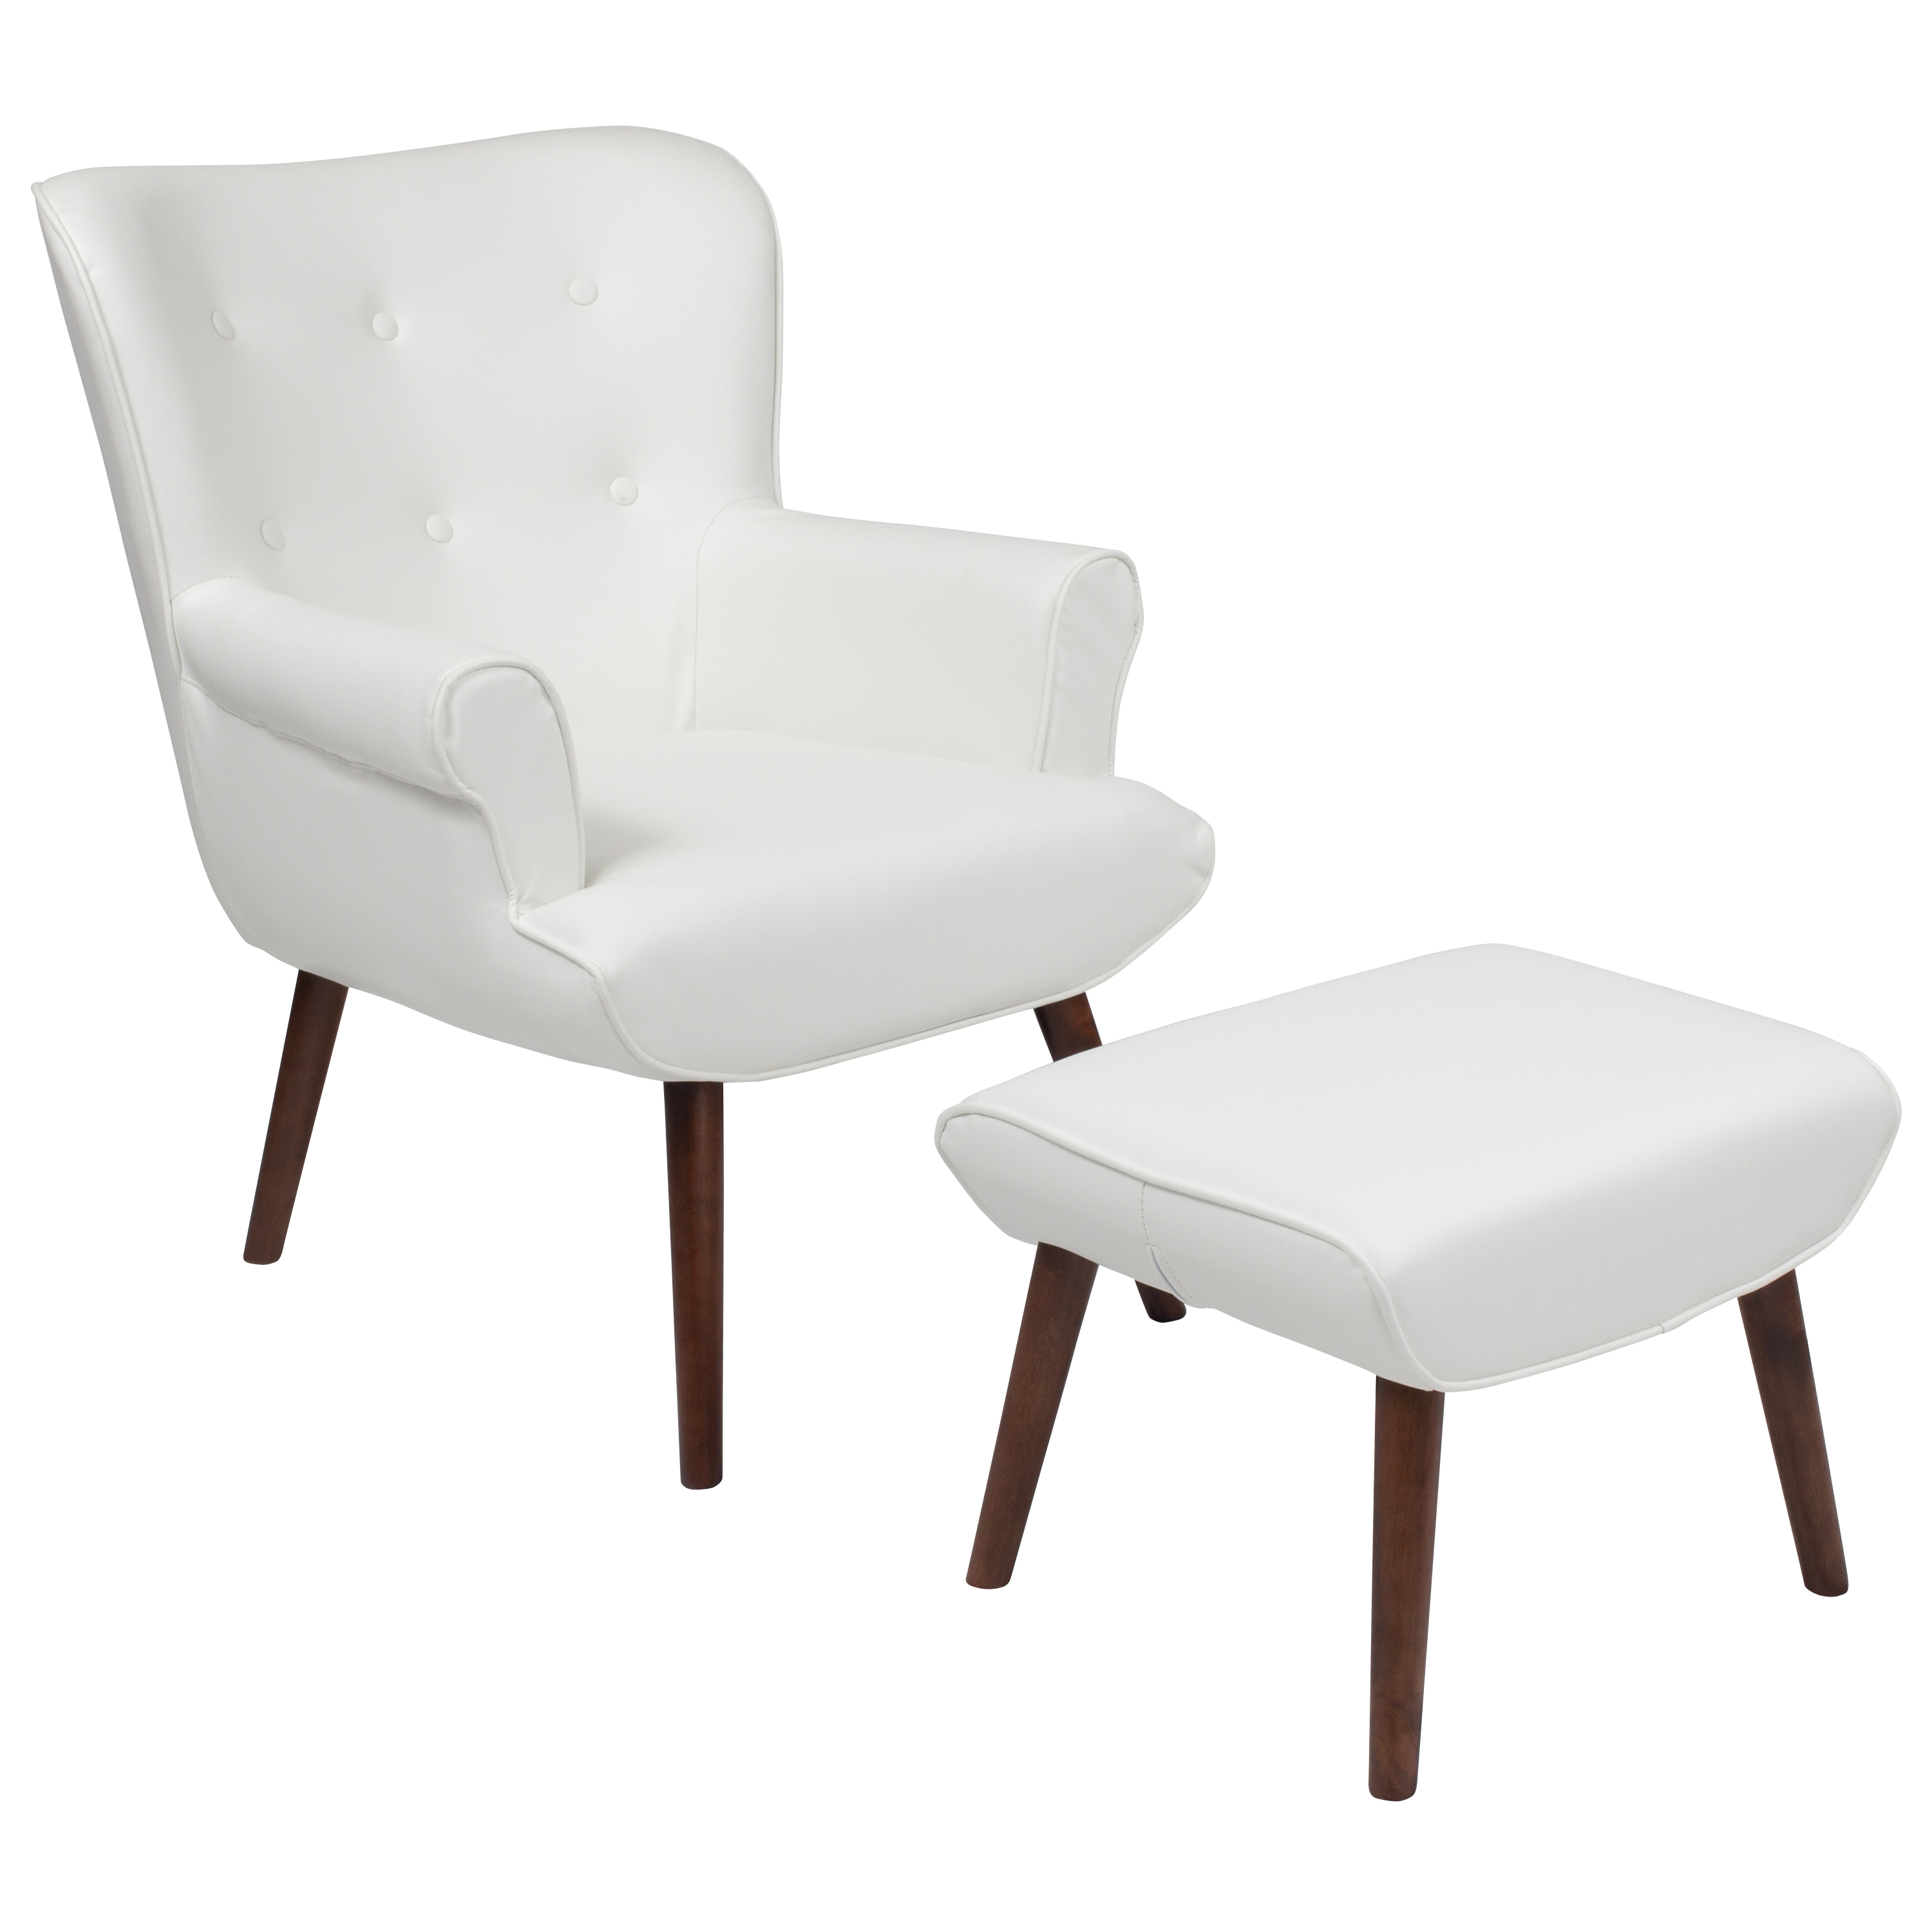 Flash Furniture Bayton Upholstered Wingback Chair with Ottoman in White LeatherSoft - image 1 of 4